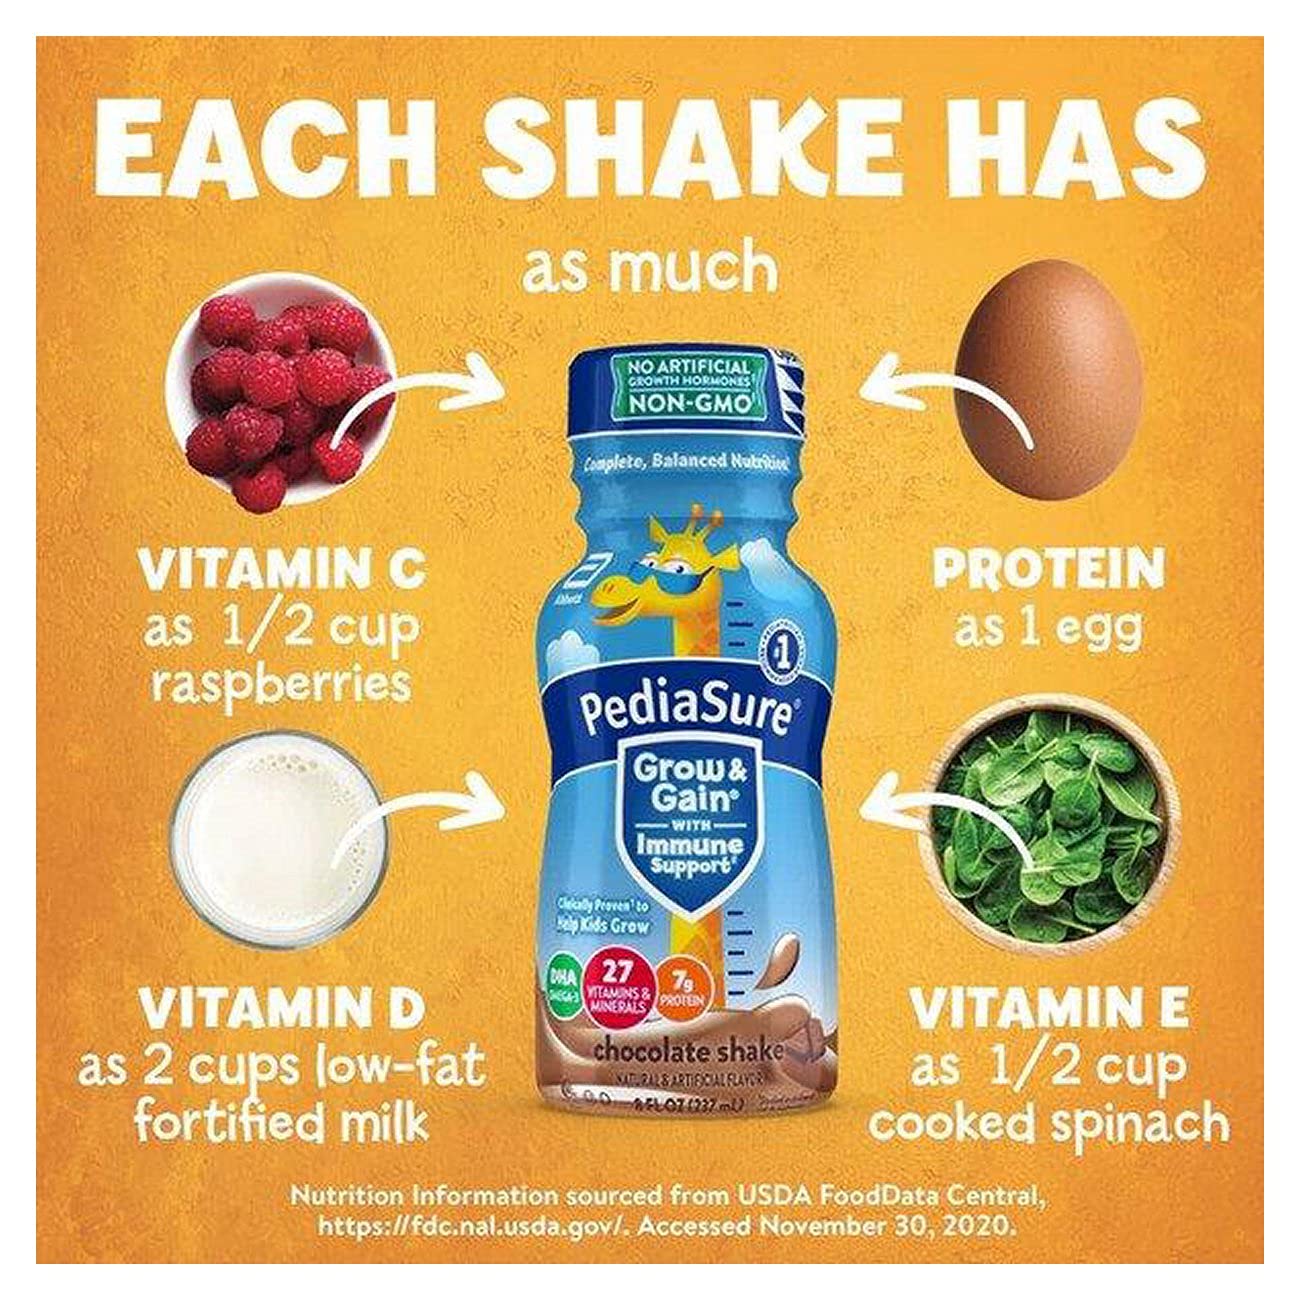 PediaSure Grow & Gain with Immune Support, Kids Protein Shake, 27 Vitamins and Minerals, 7g Protein, Helps Kids Catch Up On Growth, Non-GMO, Gluten-Free, Chocolate, 8 Fl Oz (Pack of 24)